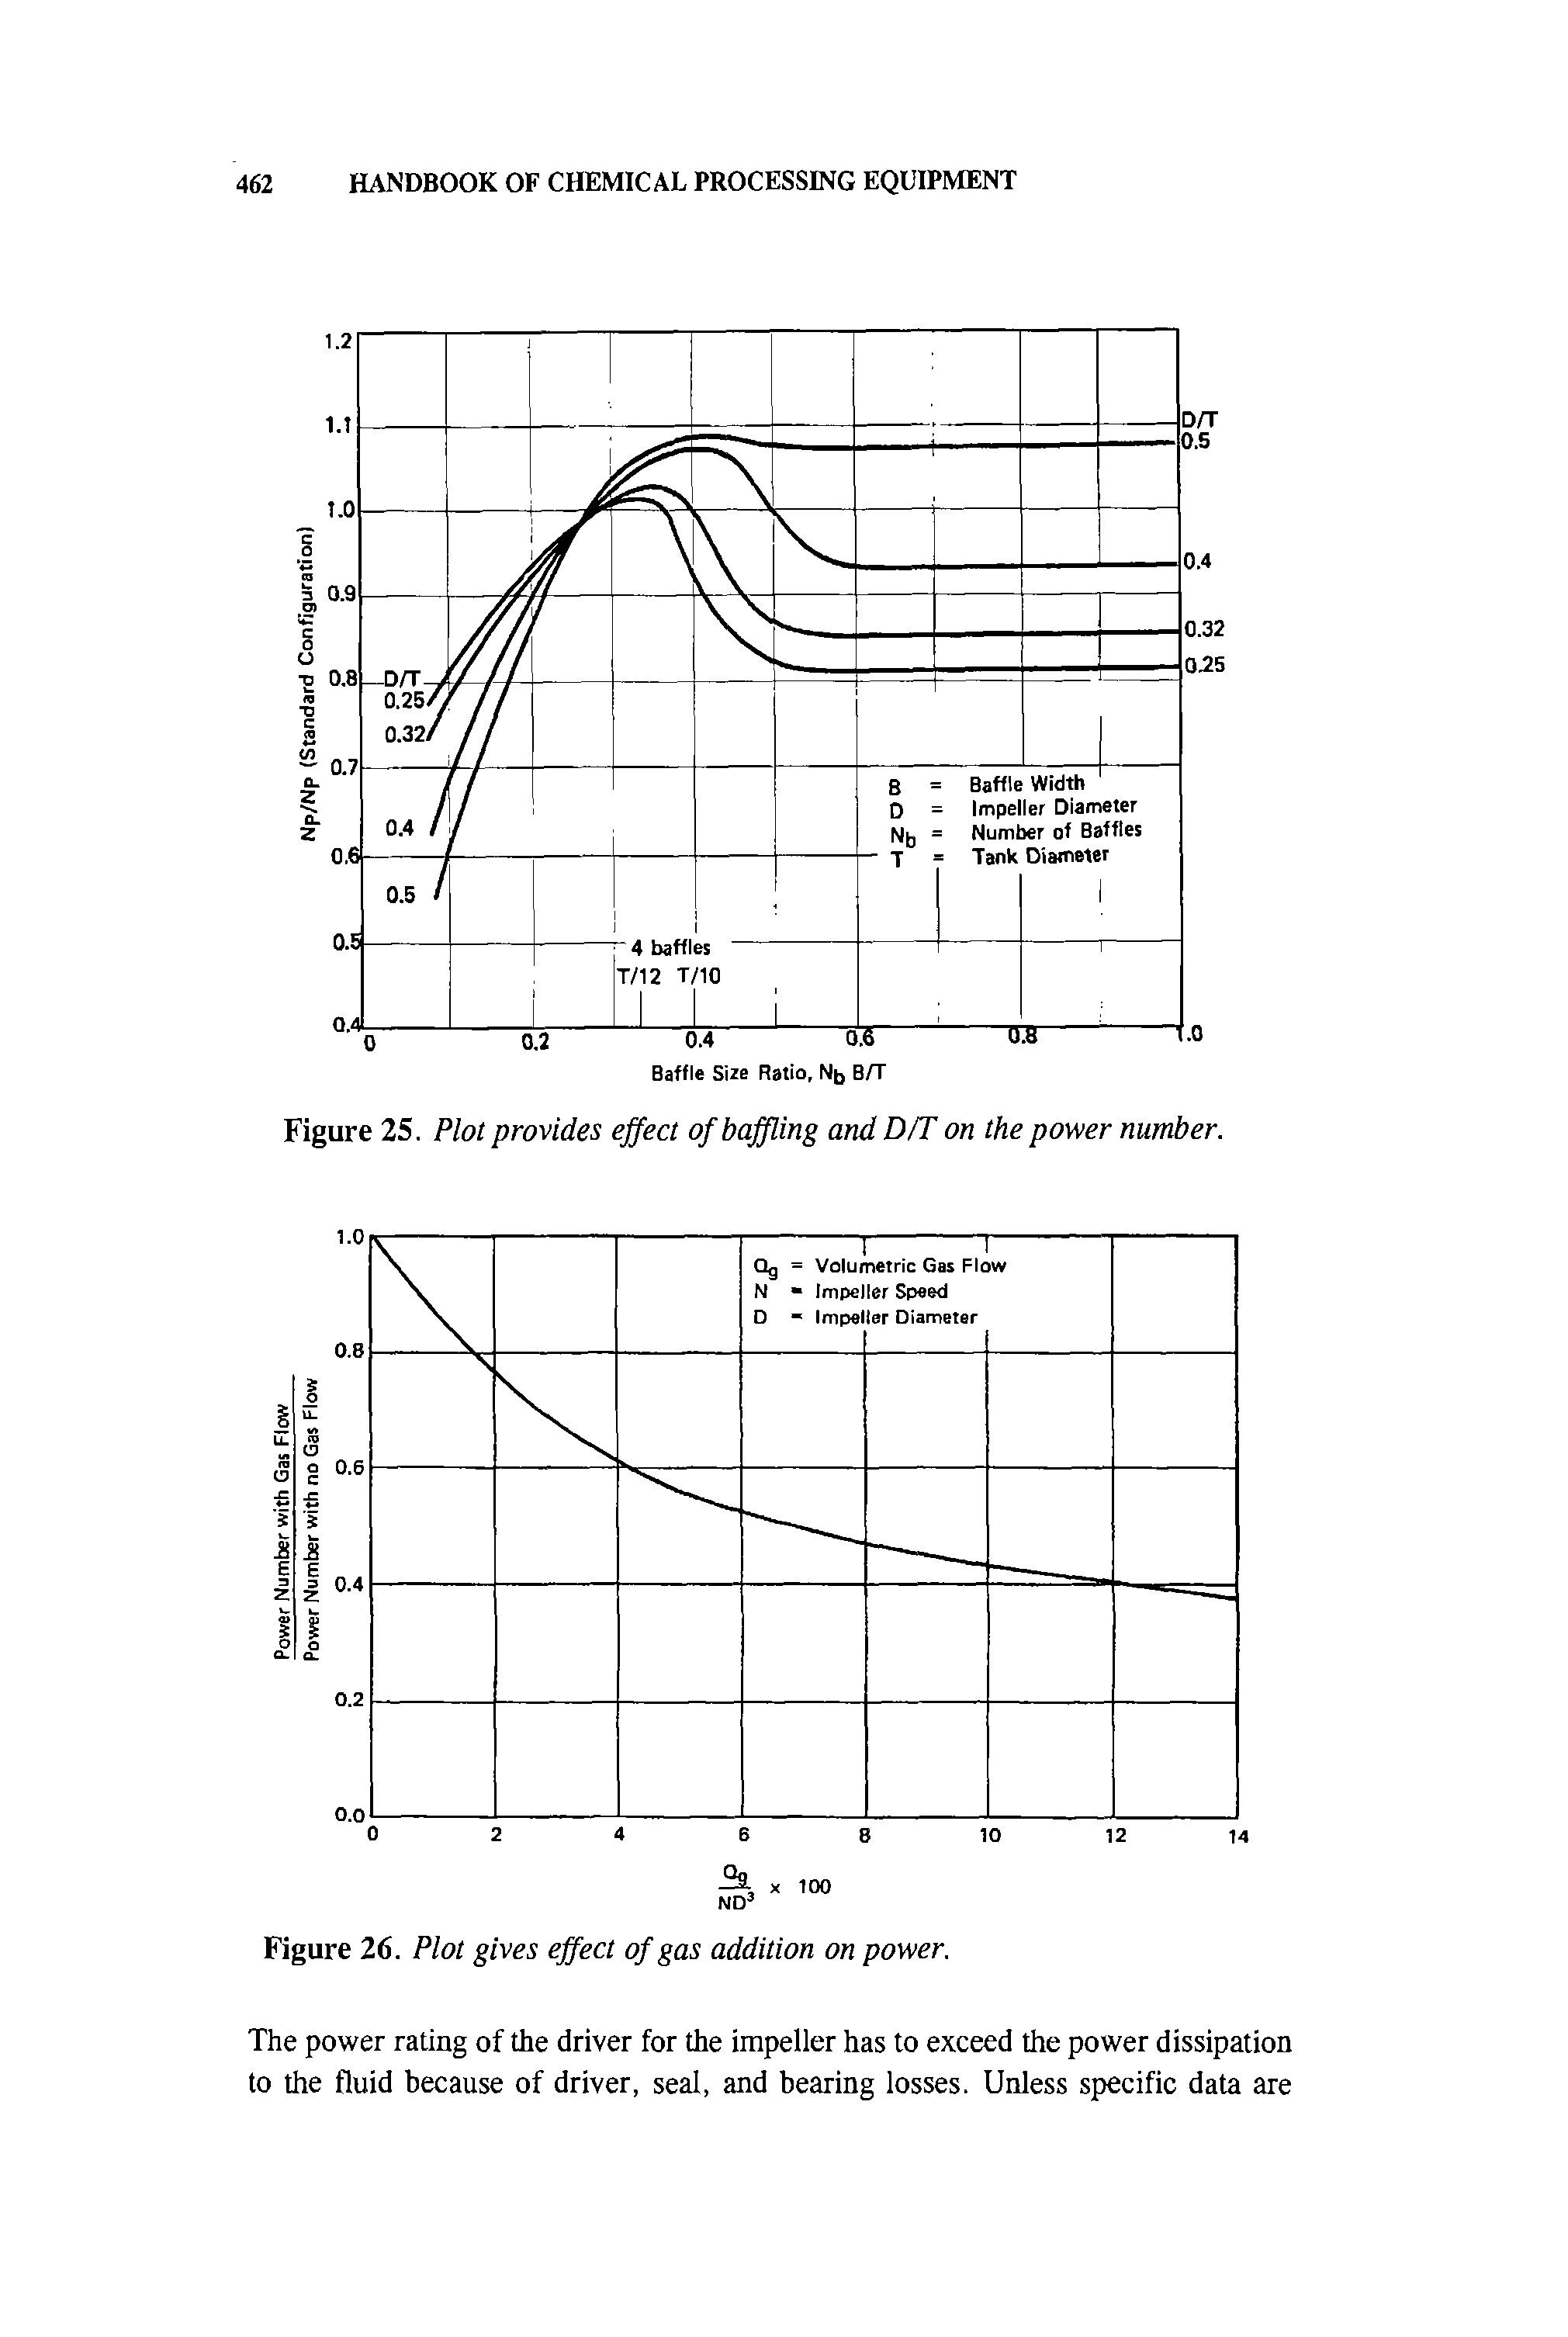 Figure 25. Plot provides effect of baffling and D/T on the power number.